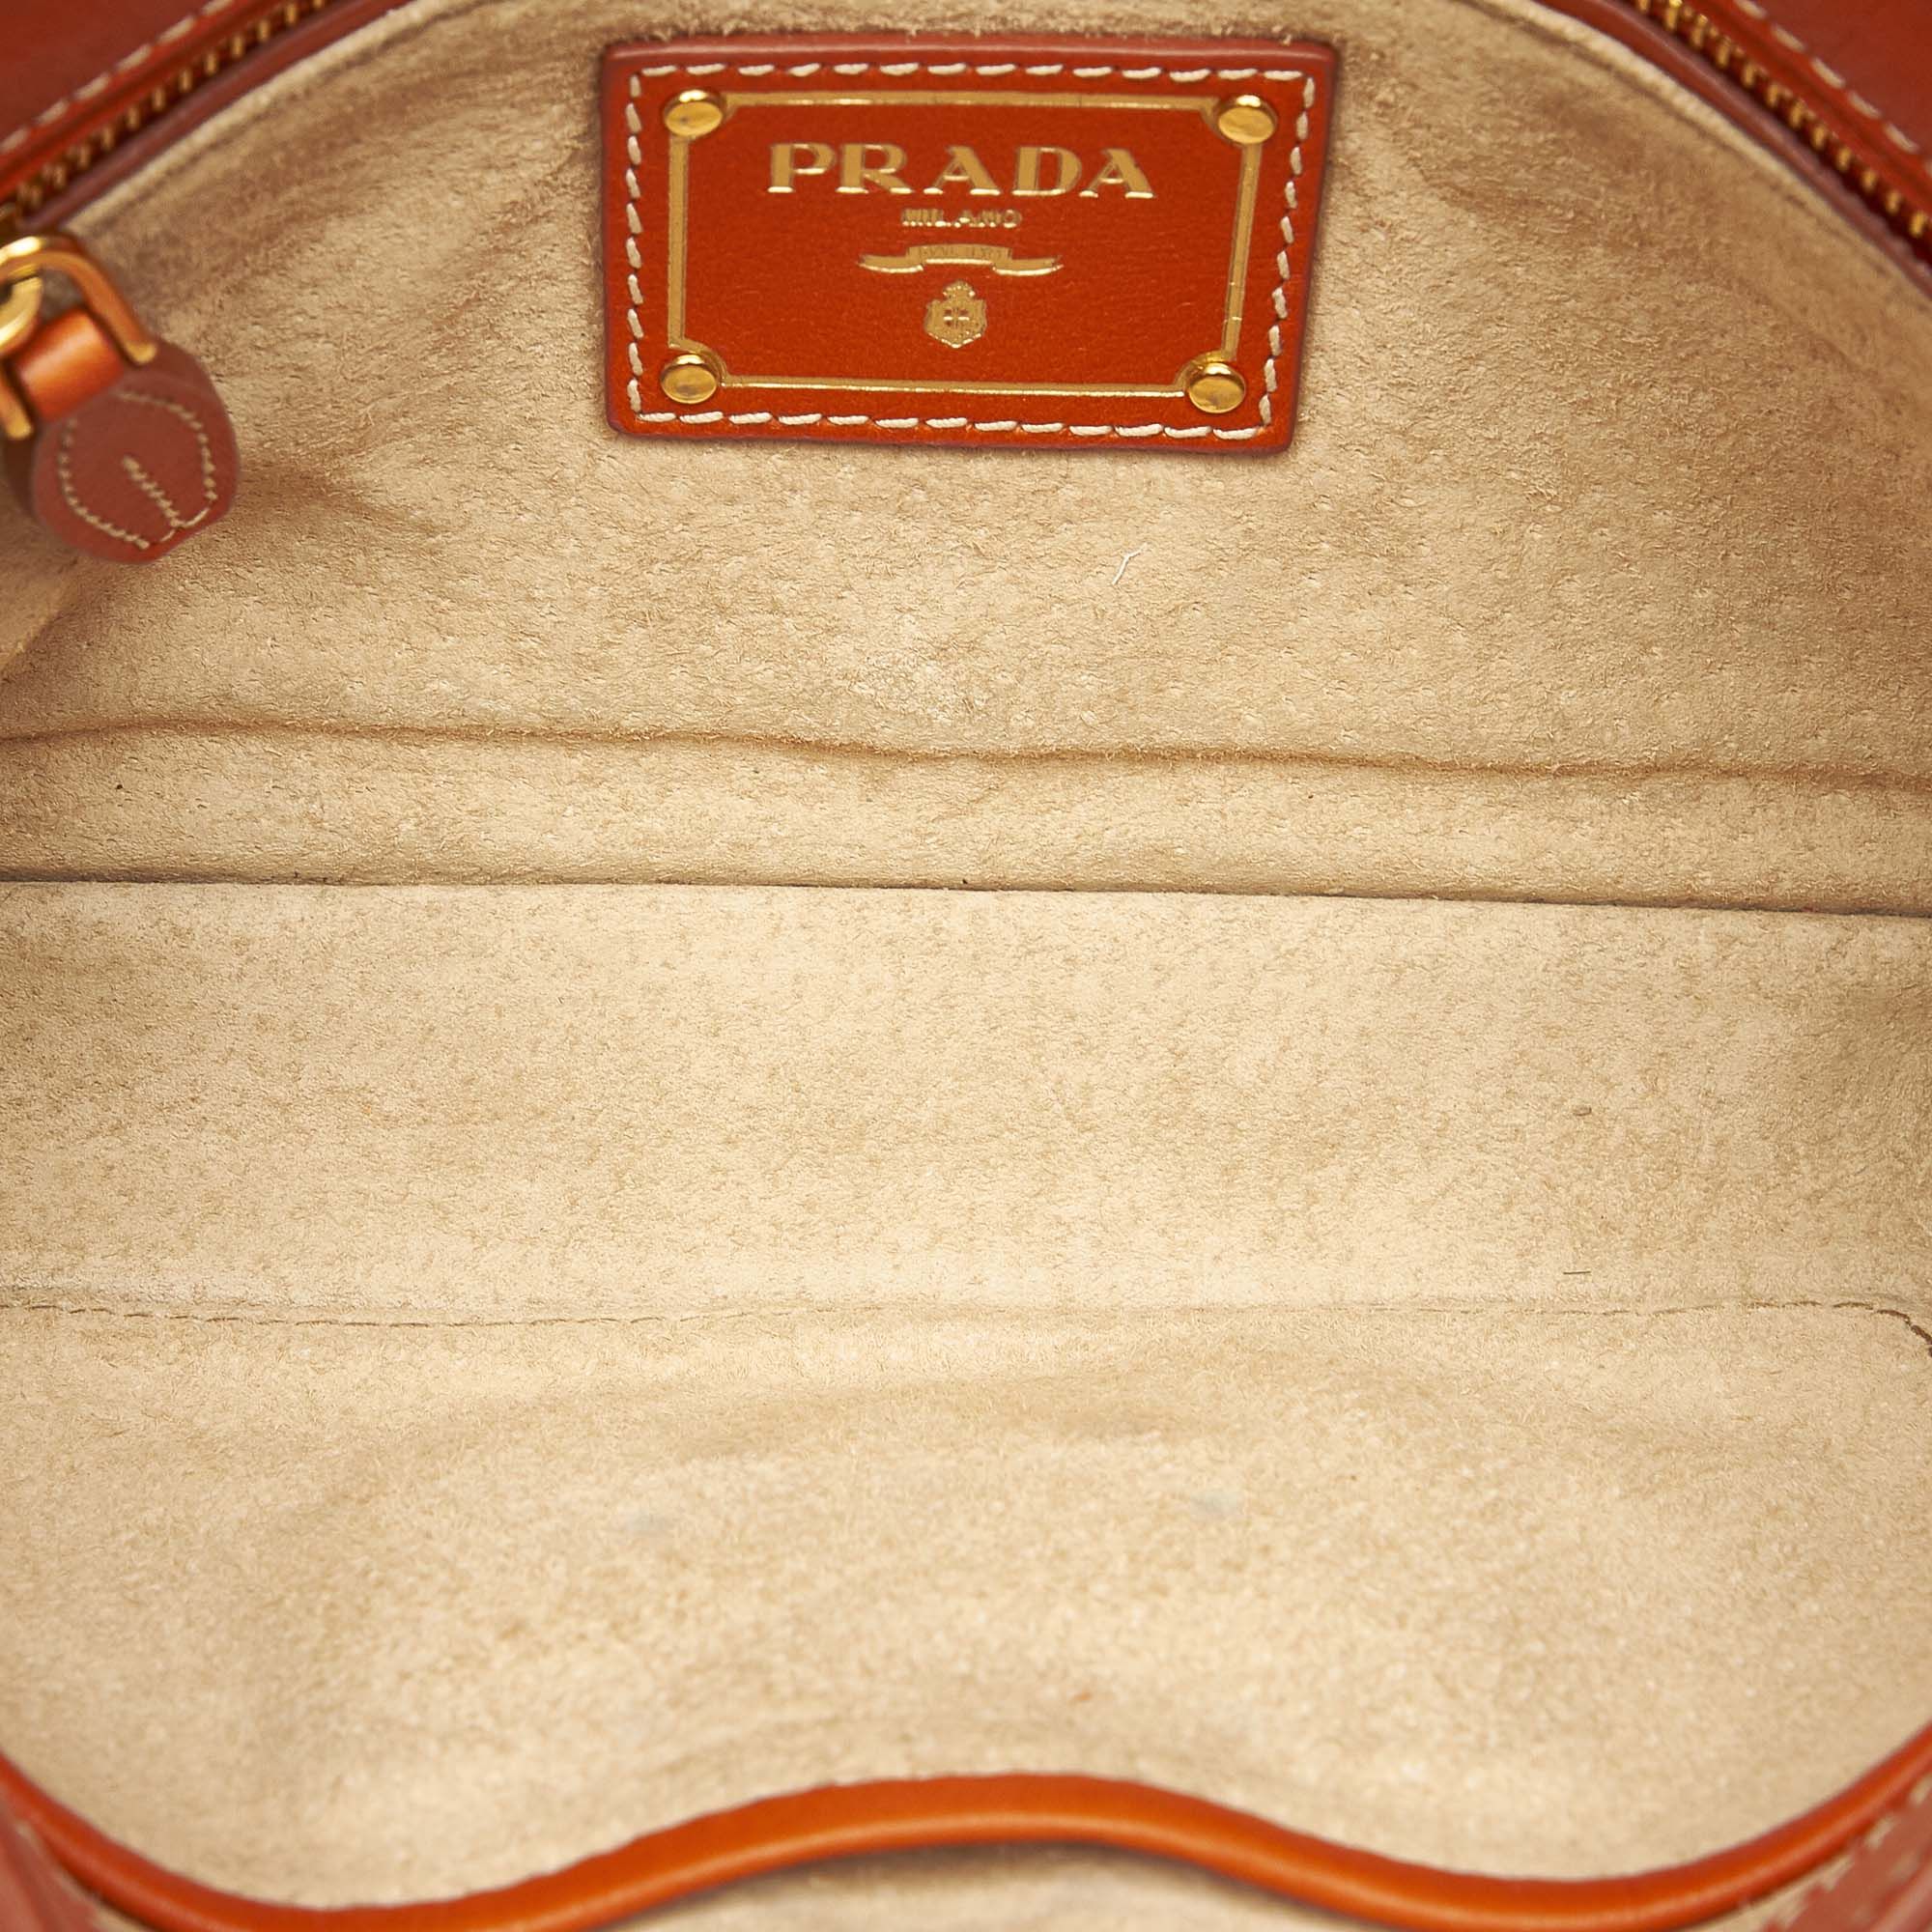 VINTAGE. RRP AS NEW. The City clutch bag features a leather body, a front flap with a push lock closure, and an interior zip and slip pockets.Exterior back is discolored and scratched. Exterior bottom is discolored. Exterior corners is discolored. Exterior front is discolored and scratched. Exterior side is discolored. Lock is scratched and tarnished. Interior lining is discolored. Interior pocket is discolored.

Dimensions:
Length 13cm
Width 23cm
Depth 5cm

Original Accessories: This item has no other original accessories.

Color: Orange
Material: Leather x Calf
Country of Origin: Italy
Boutique Reference: SSU94380K1342


Product Rating: VeryGoodCondition